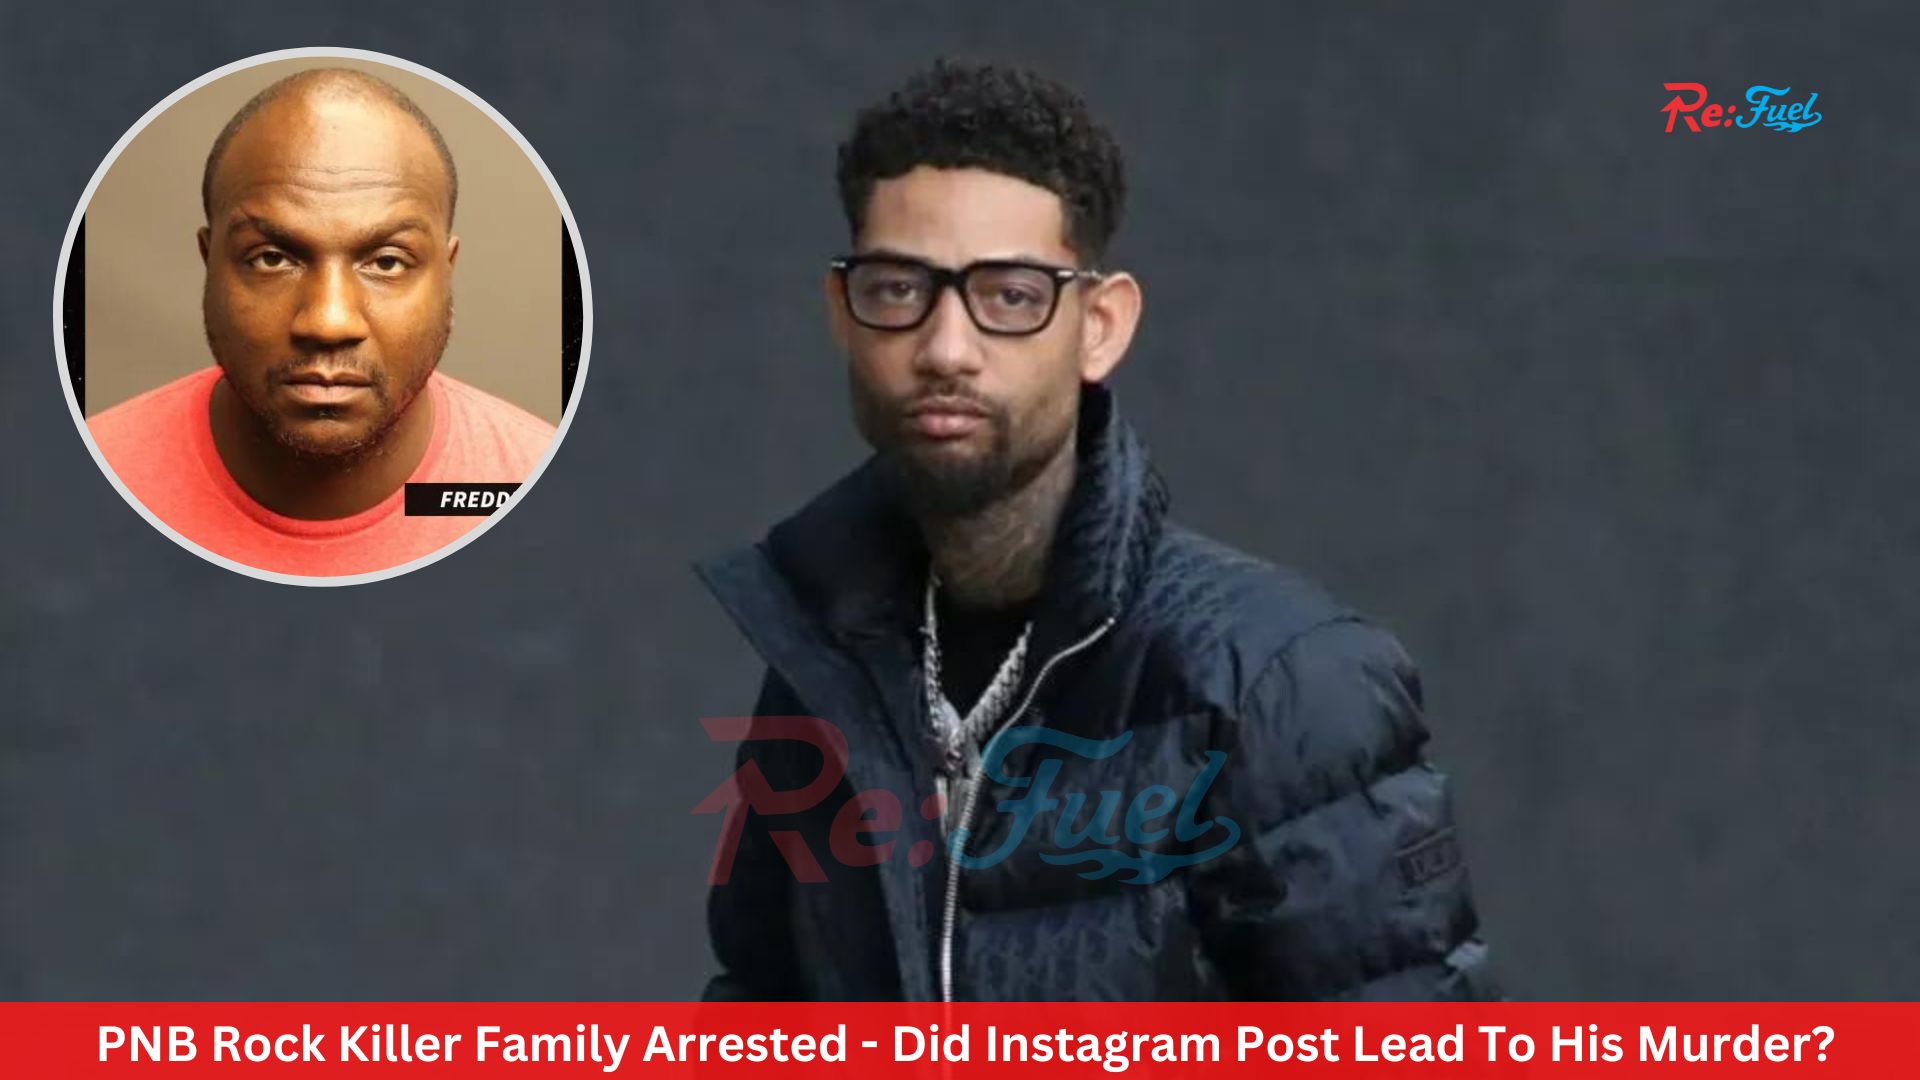 PNB Rock Killer Family Arrested - Did Instagram Post Lead To His Murder?